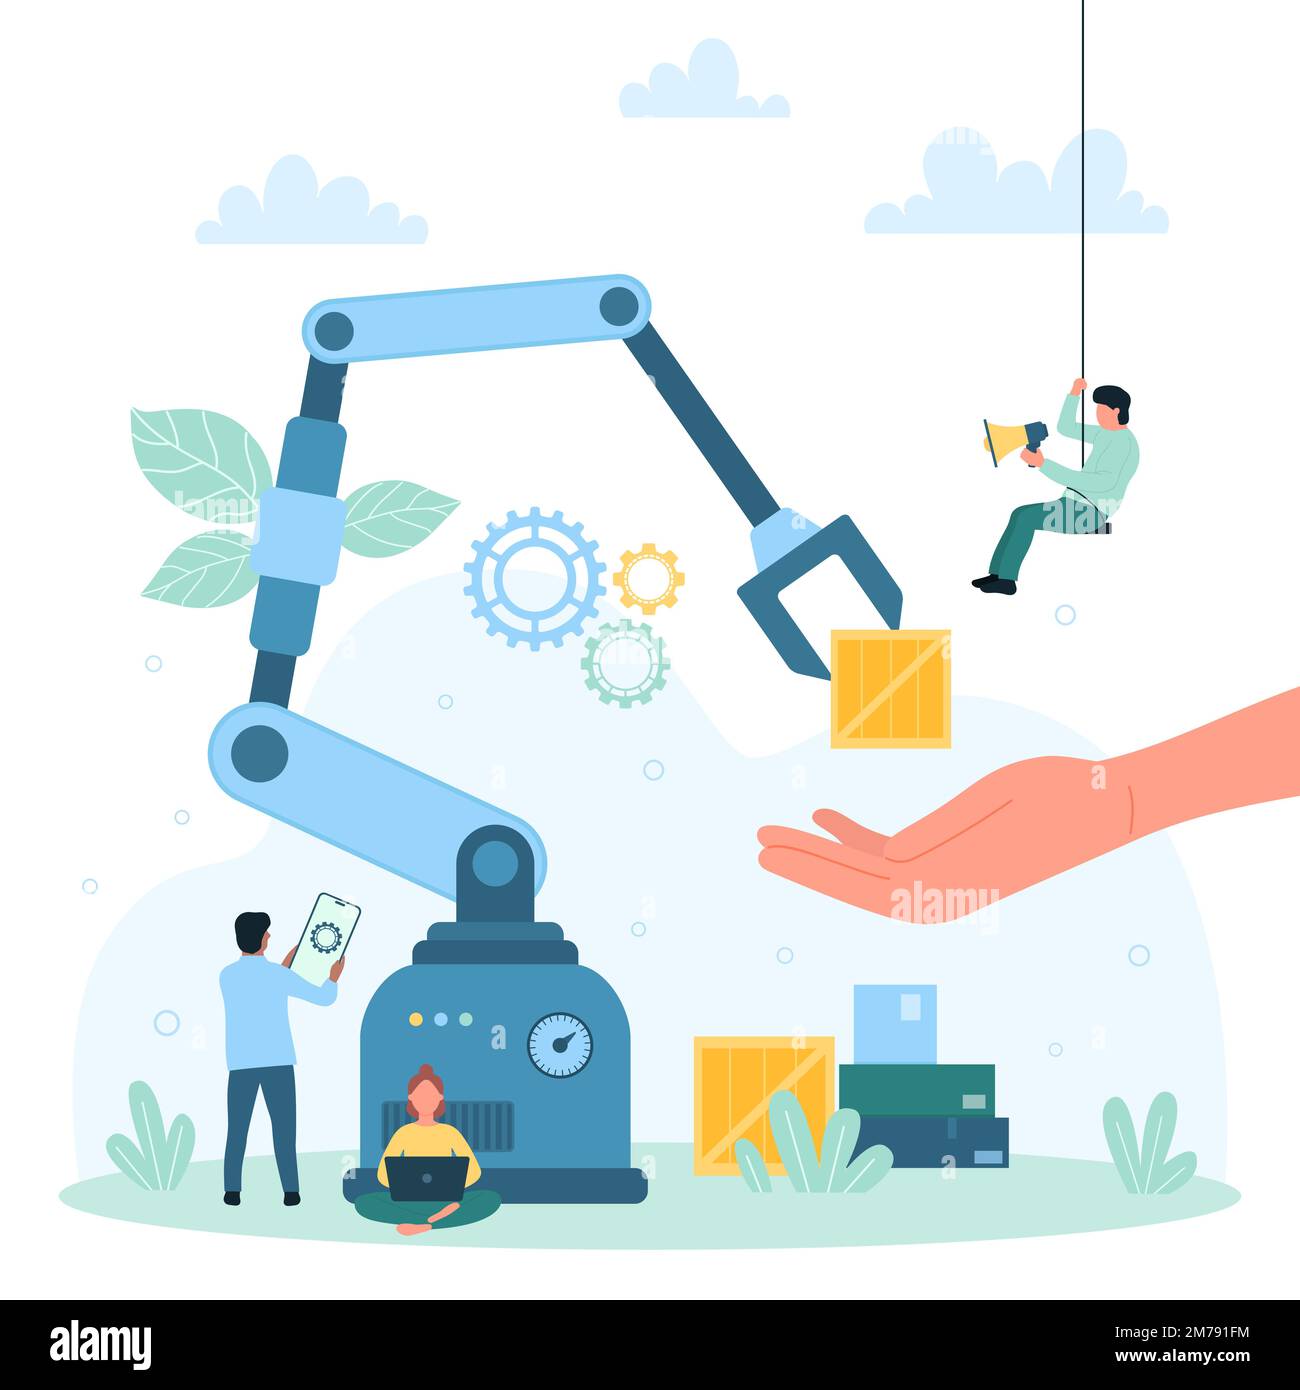 Warehouse automation process vector illustration. Cartoon tiny people work with robots for distribution, logistics and inventory of goods and packages, automated arms carry box to hand of supervisor Stock Vector